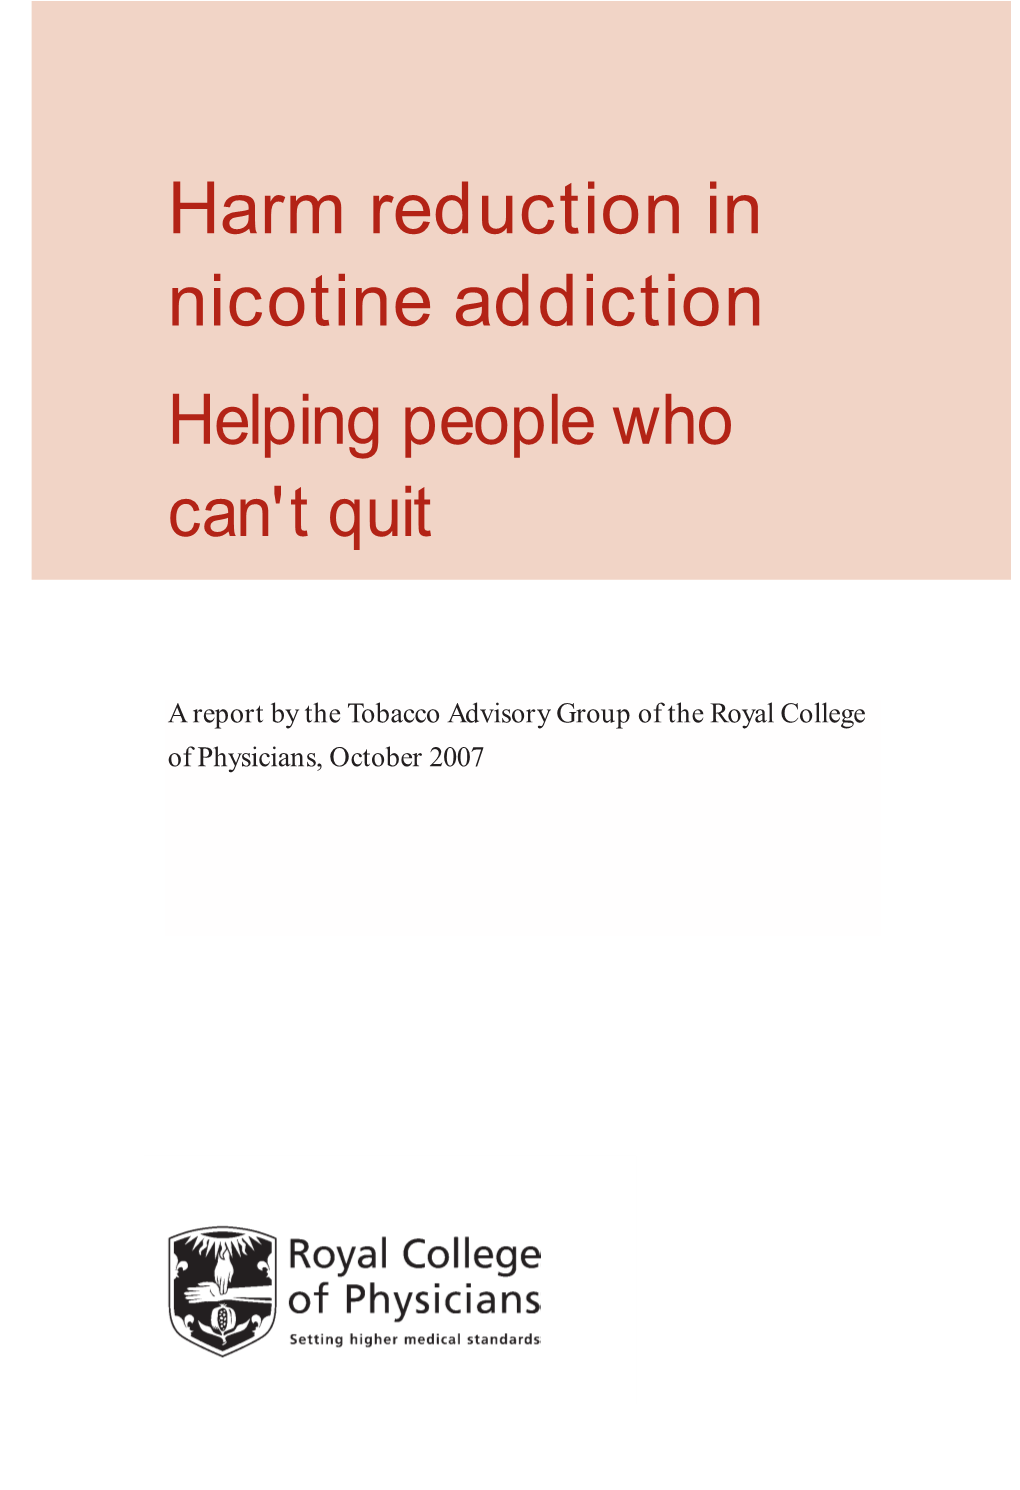 Harm Reduction in Nicotine Addiction: Helping People Who Can't Quit